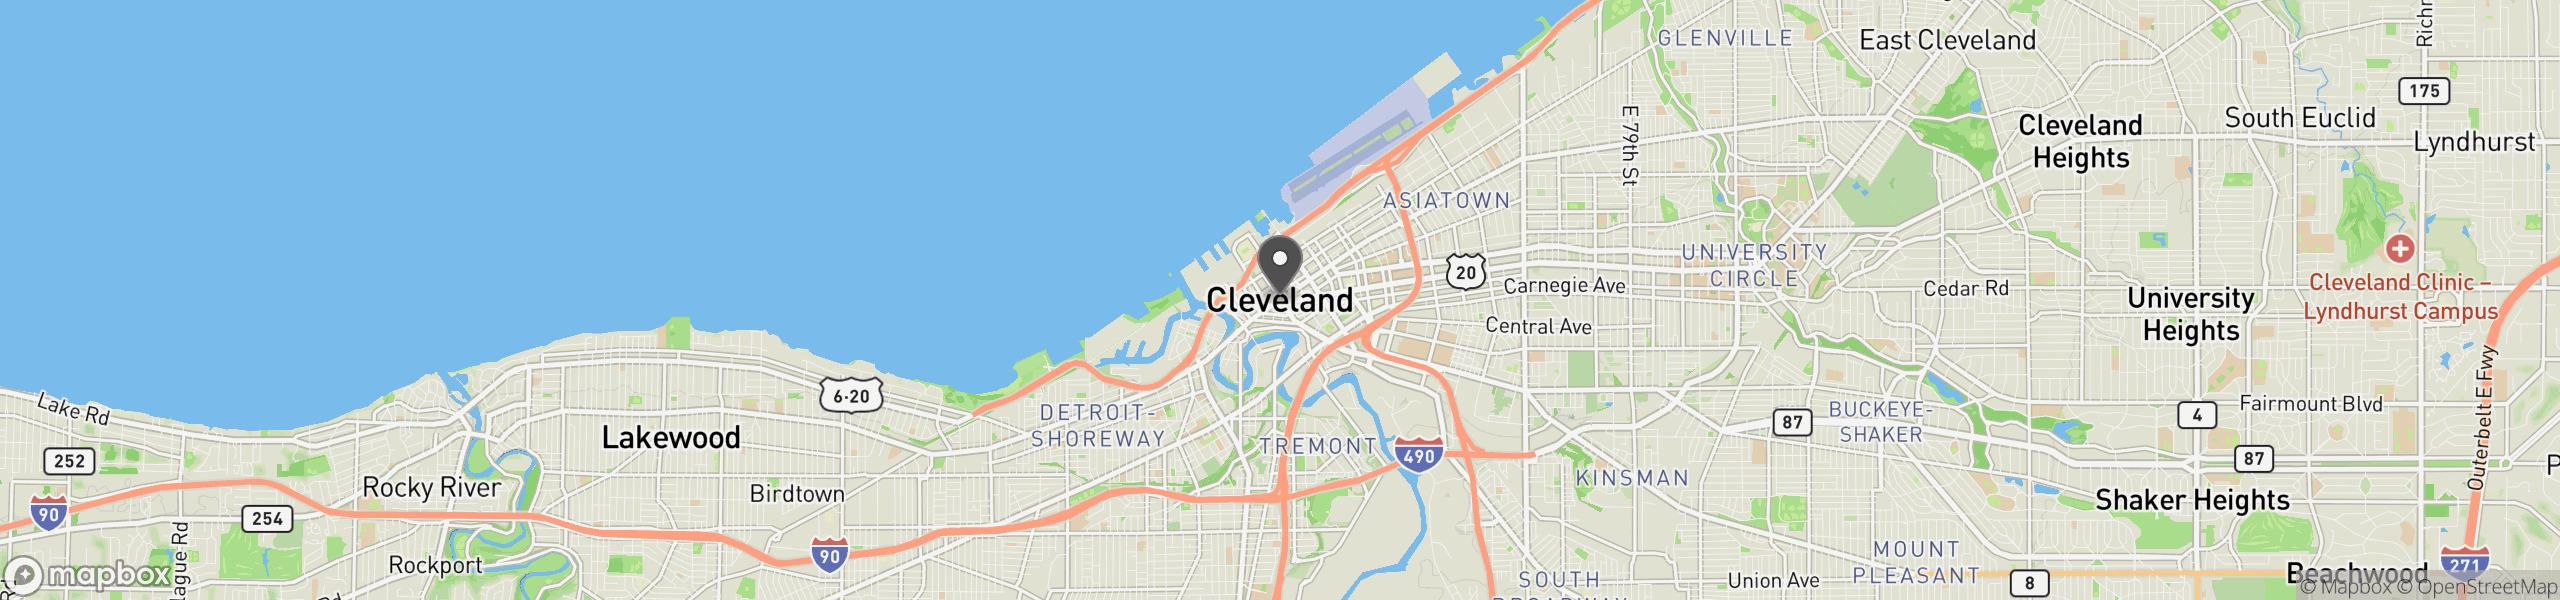 Cleveland, OH 44199